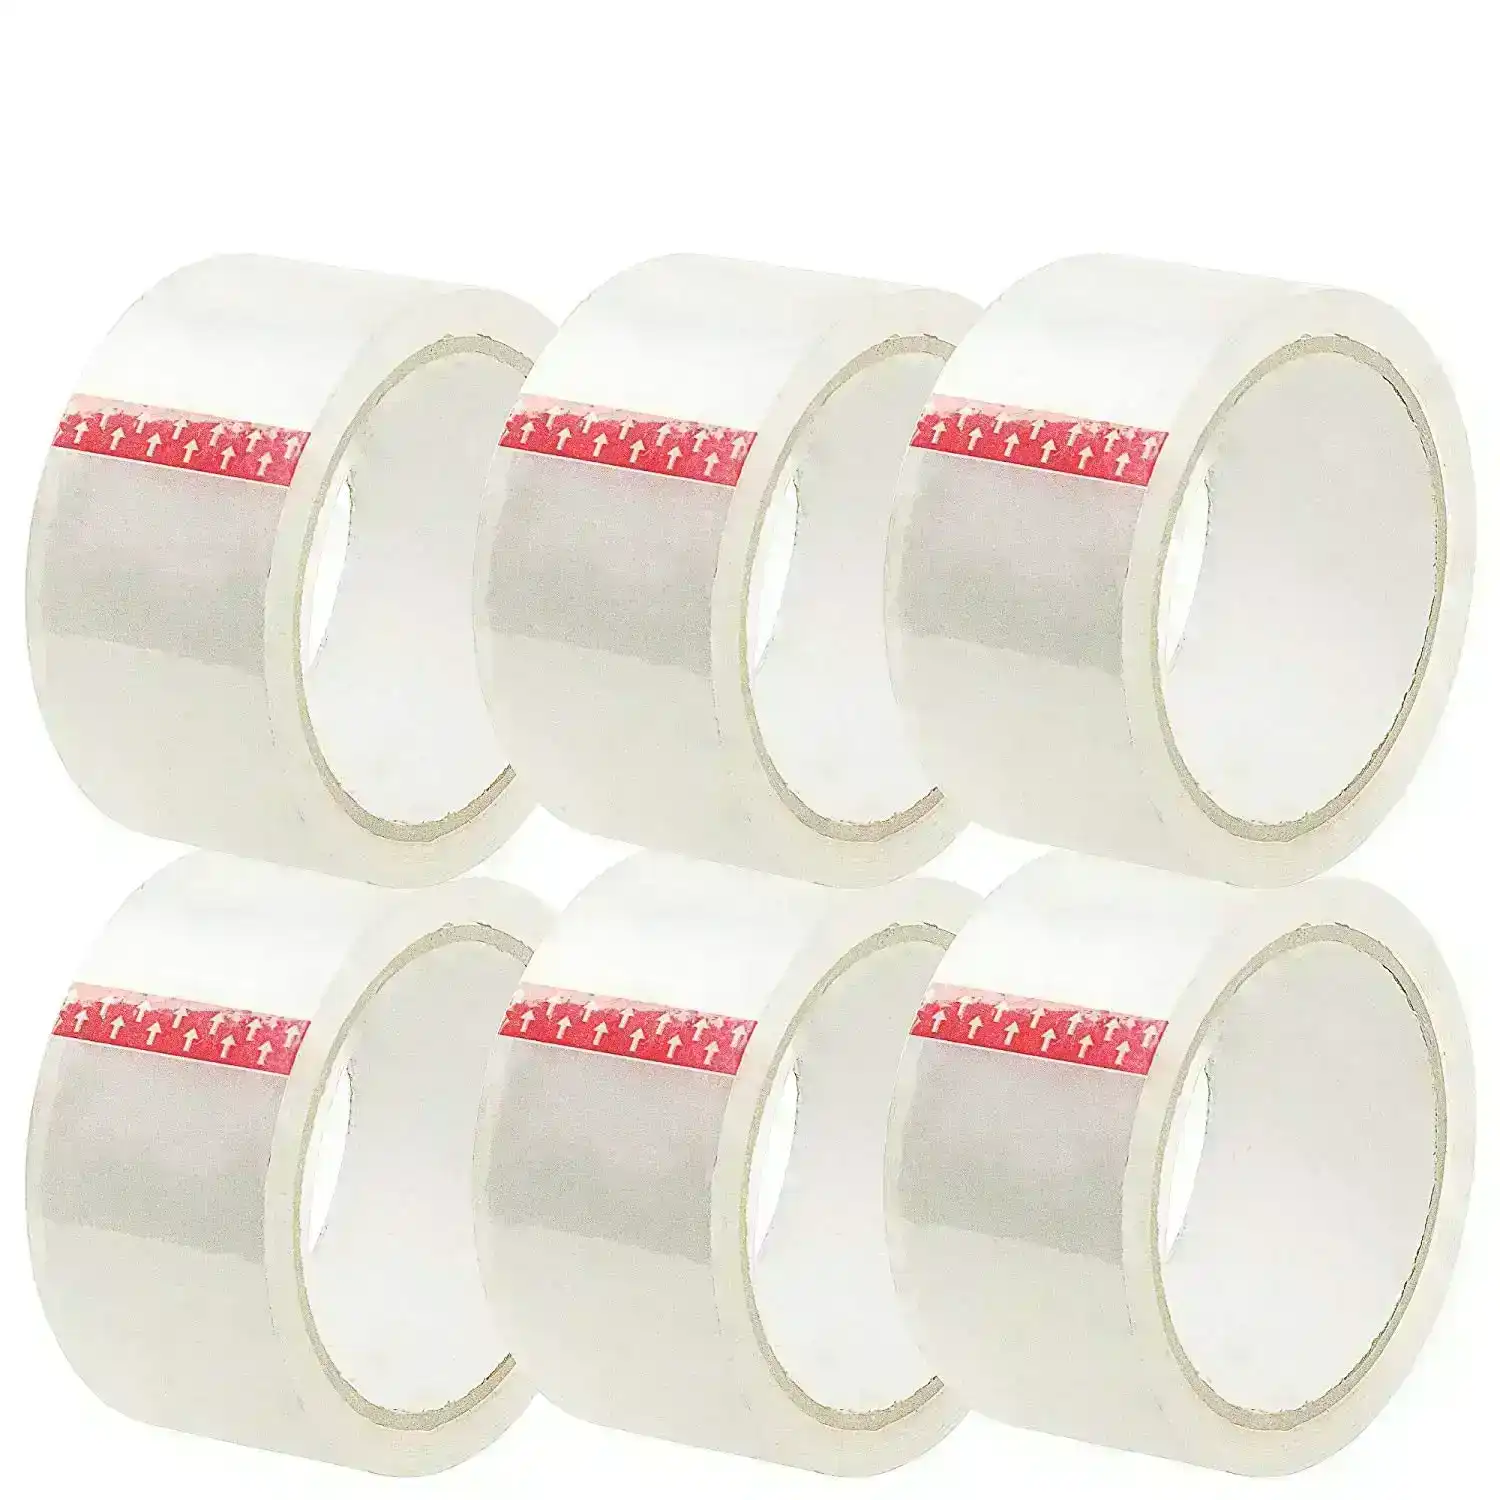 36x Clear Packing Tape Sticky Rolls Adhesive Tapes | 48mm x 75m | Value Pack